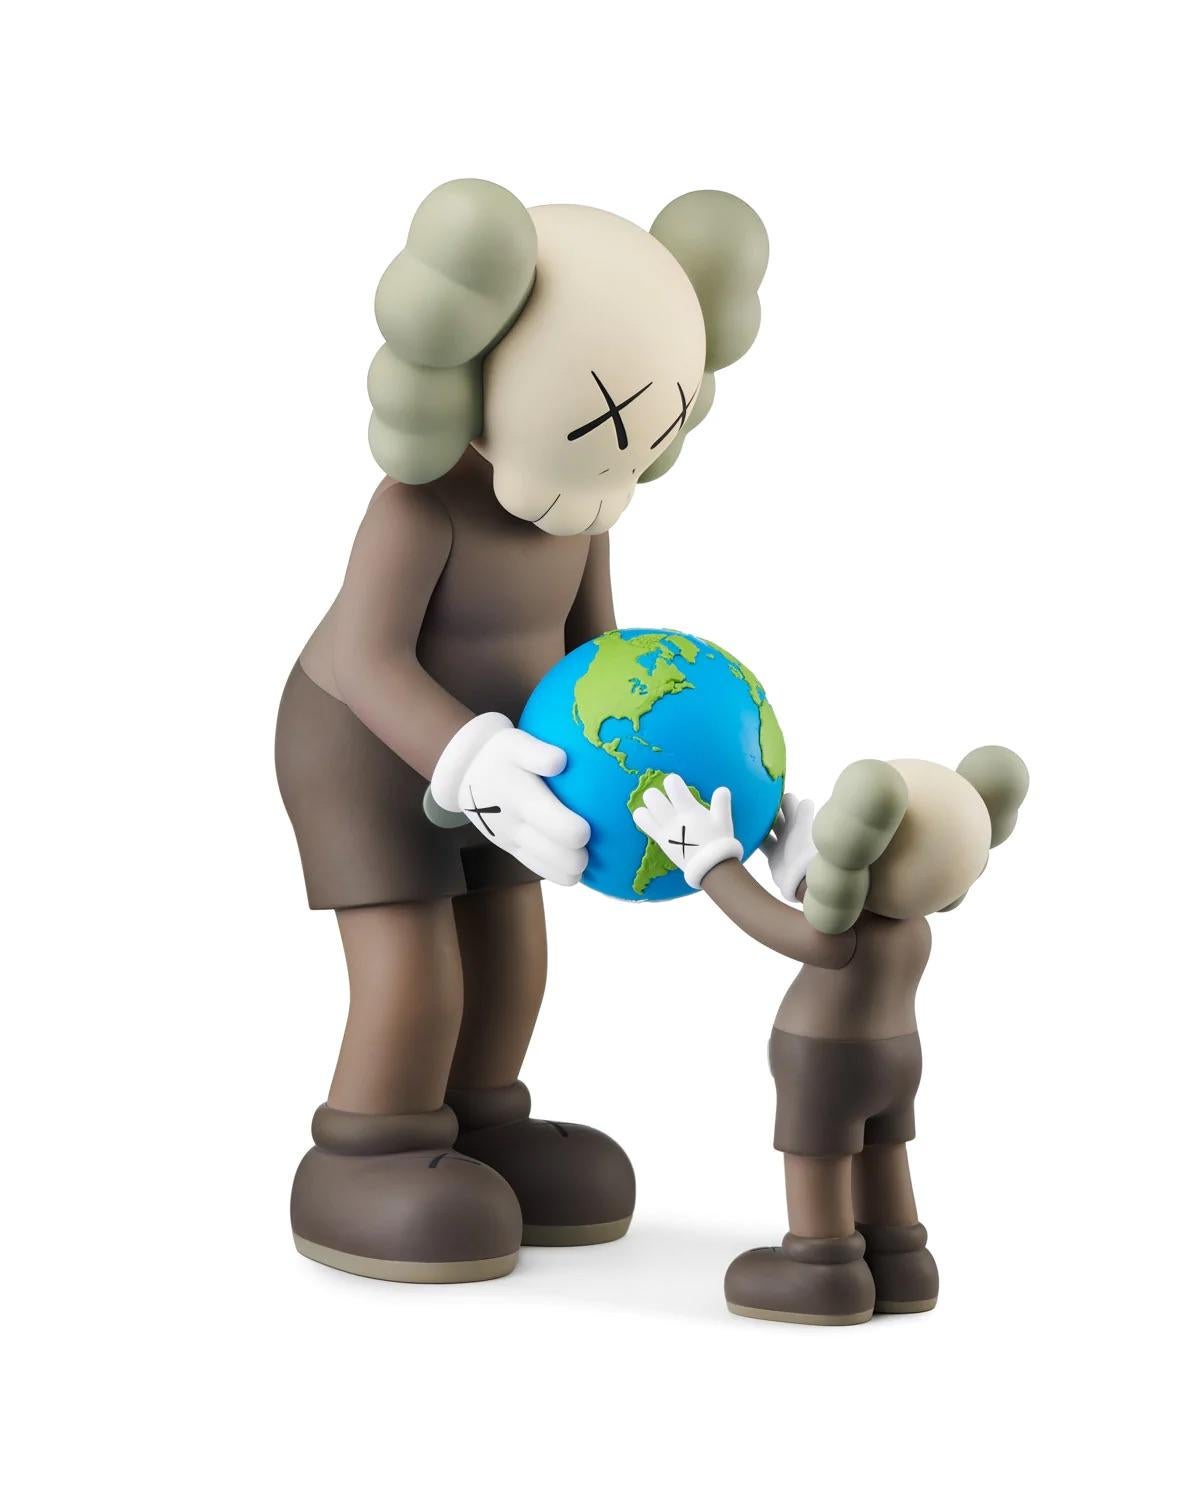 KAWS The Promise (complete set of 3 works):
A unique KAWS Companion set in the artist’s signature brown, black & grey color ways. KAWS The Promise features a blue & green globe being affectionately shared between parent & child. These timeless,